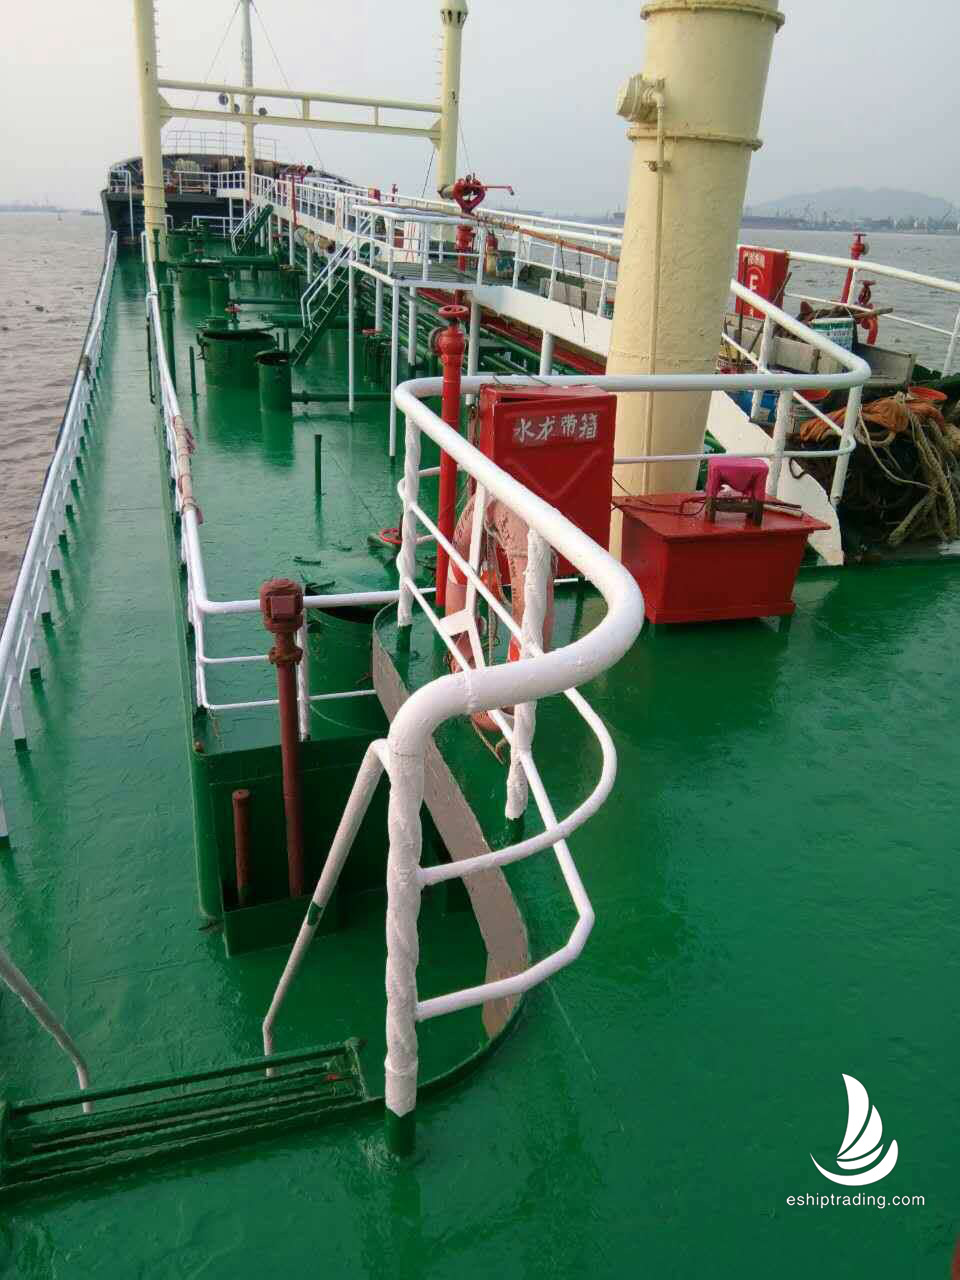 2400 T Product Oil Tanker For Sale